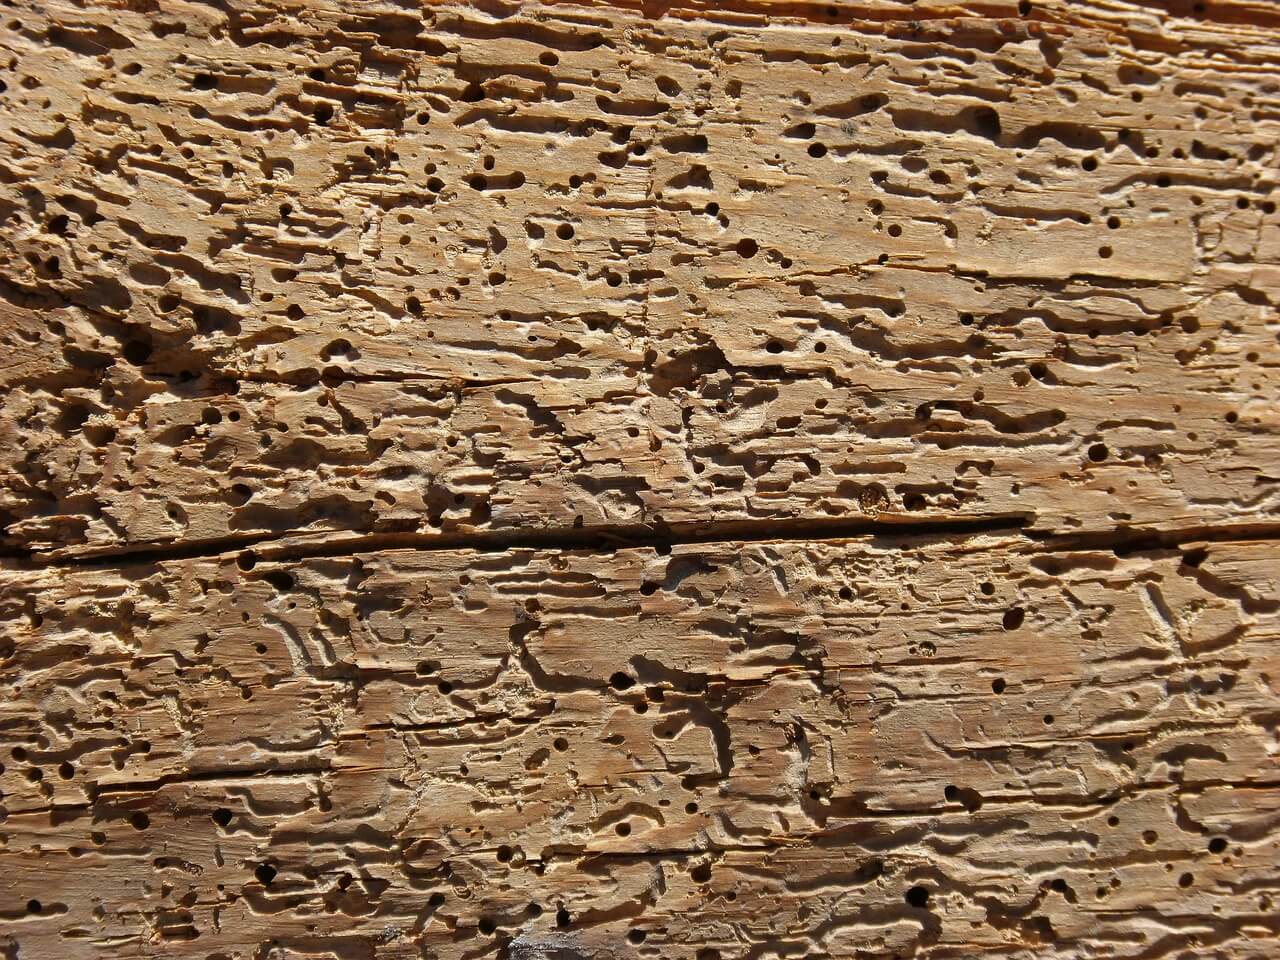 Timber affected by woodworm